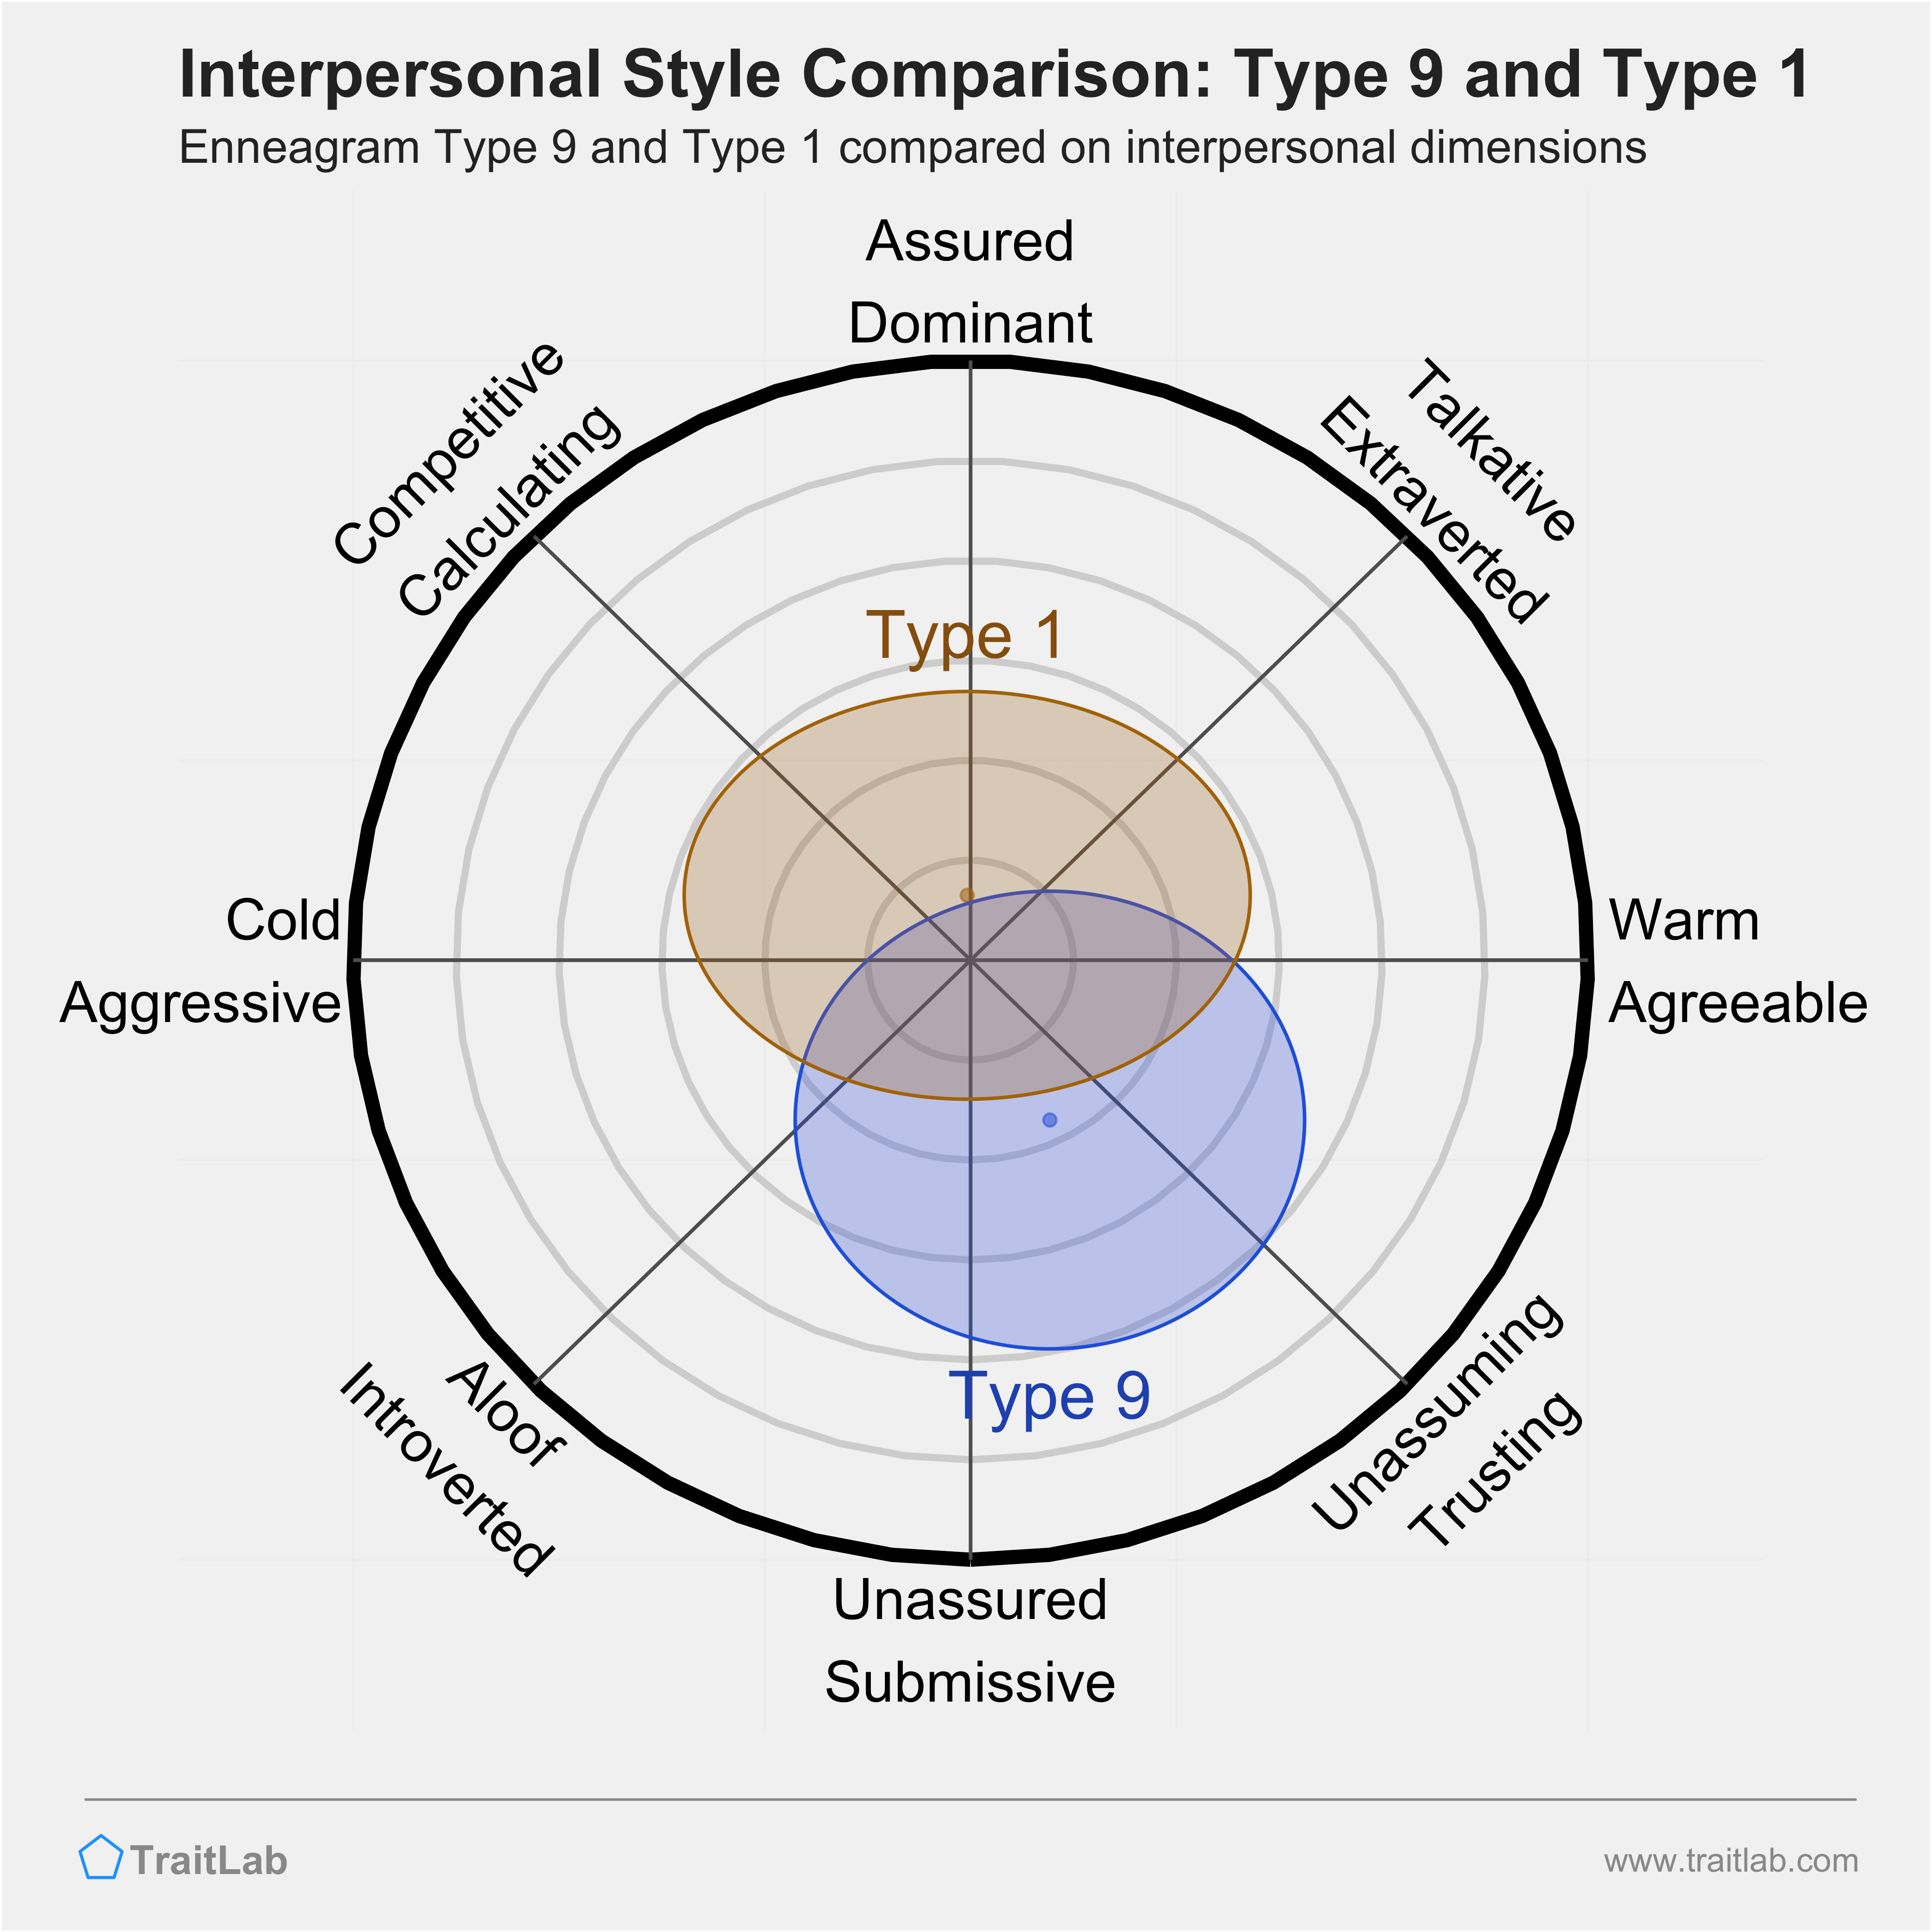 Enneagram Type 9 and Type 1 comparison across interpersonal dimensions